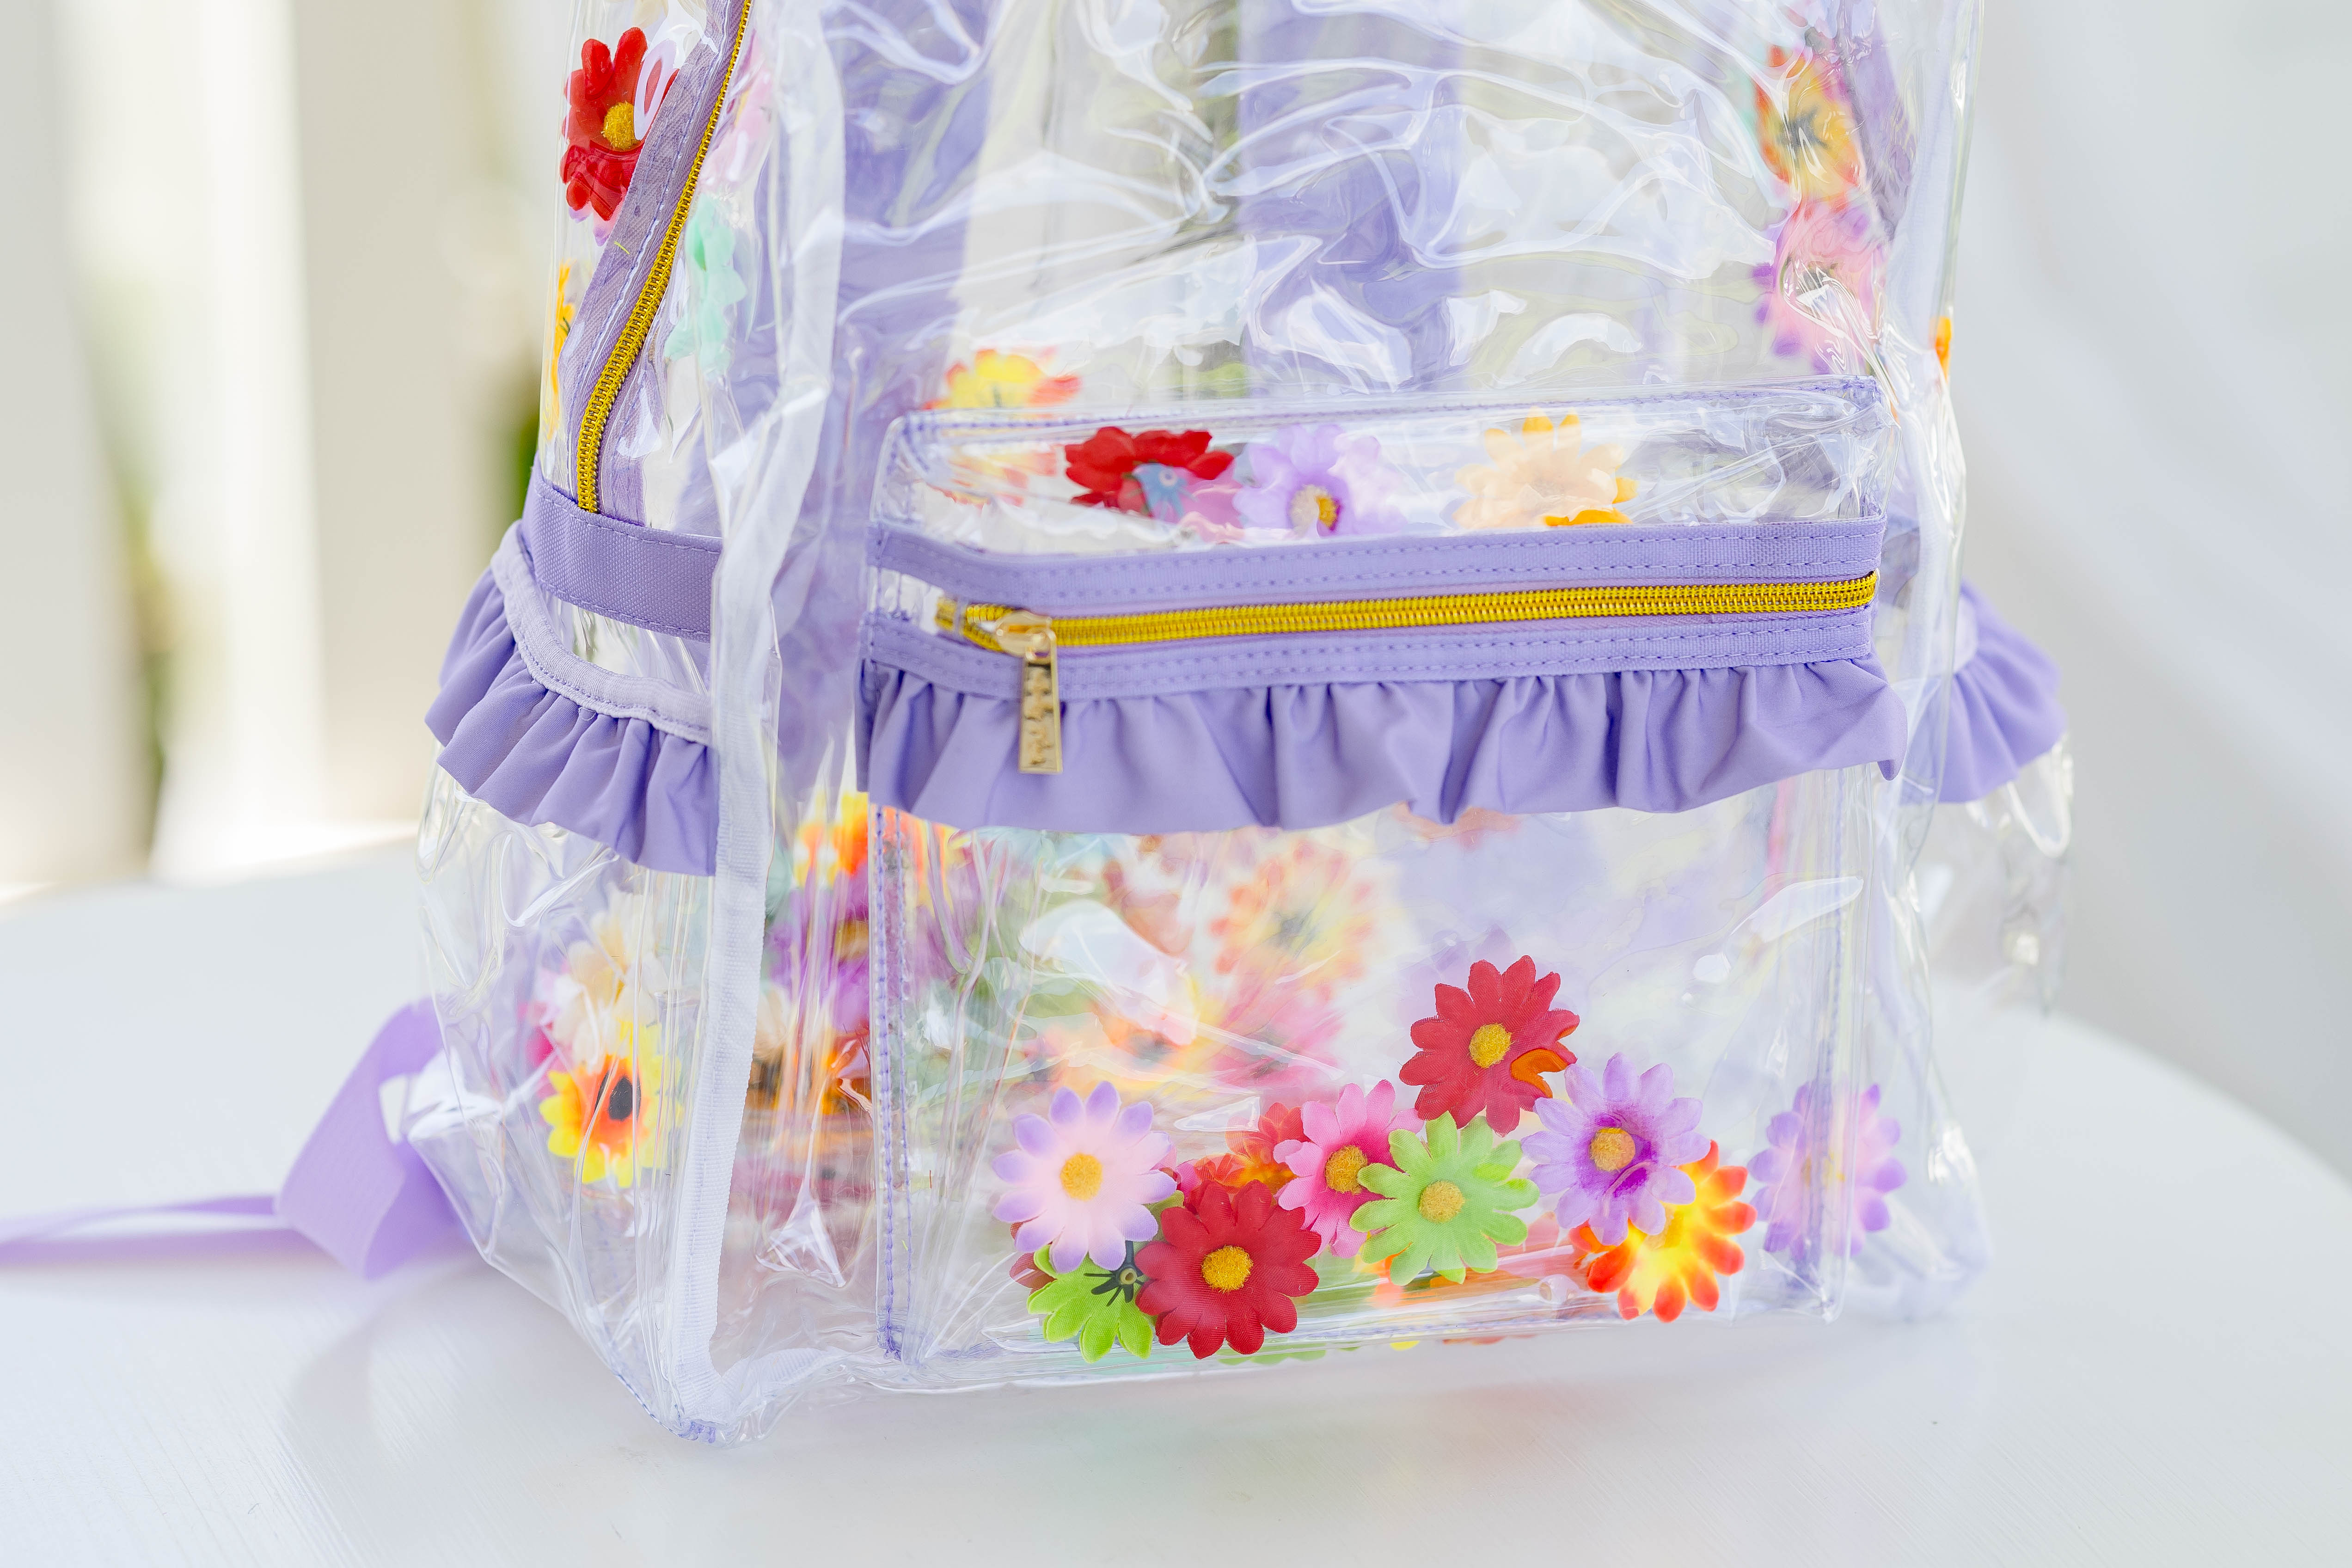 Bree Clear Backpack - Floral Frenzy (Pre-Order)